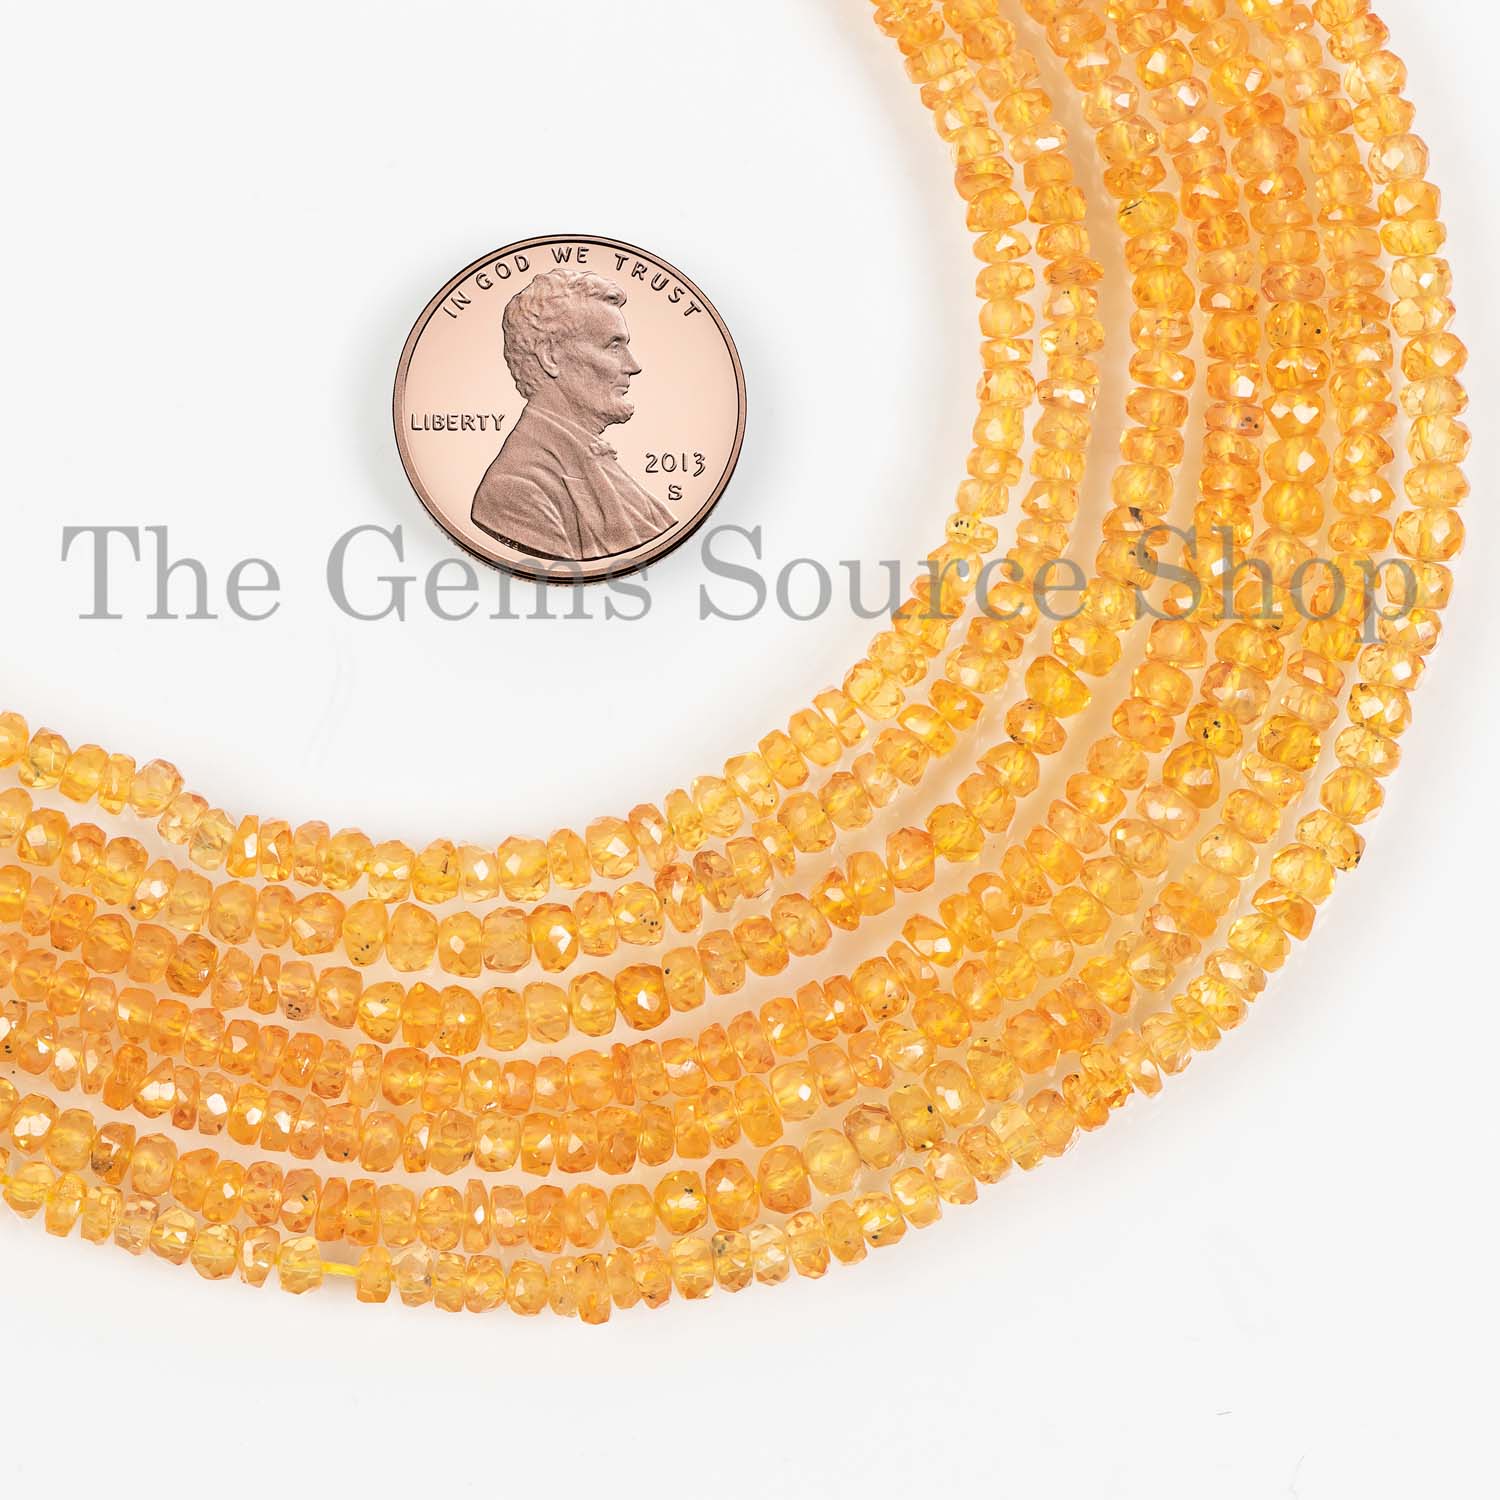 Orange Sapphire Beads, Sapphire Faceted Beads, Sapphire Rondelle Beads, Orange Sapphire Gemstone Beads